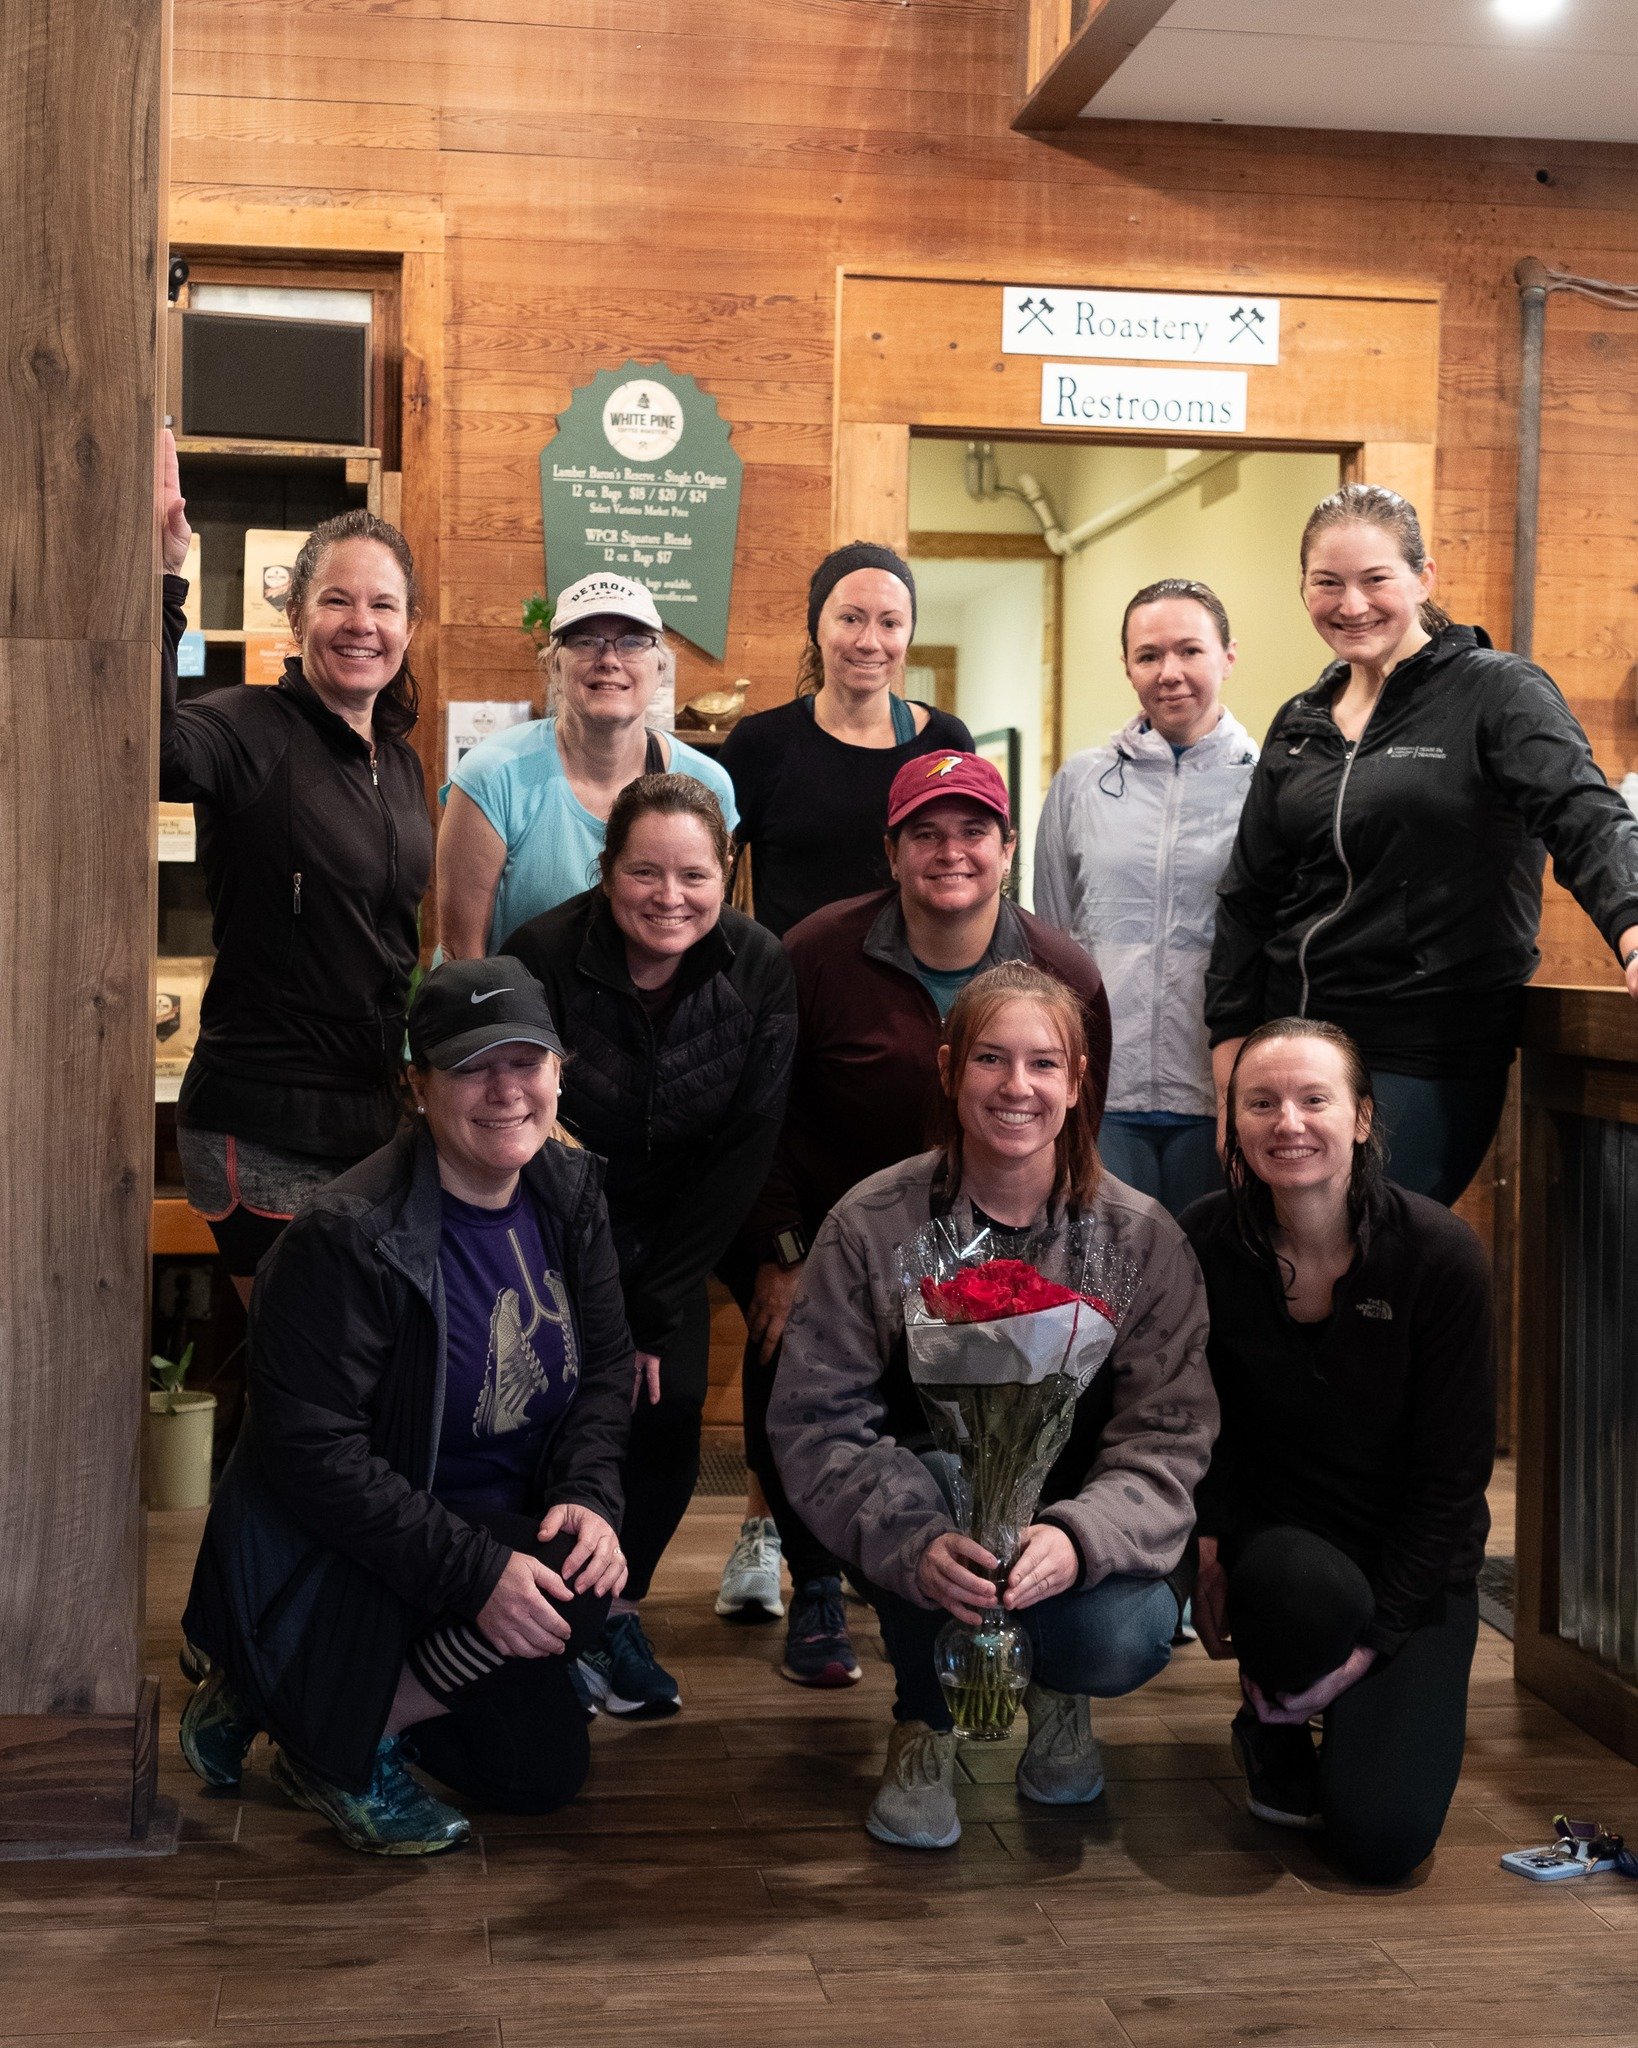 🌸 Heartfelt Thanks from WPCR to Our Amazing Local Runners! 🌸
This Saturday morning, our cafe was filled with more than just the aroma of freshly brewed coffee. The wonderful women of our local running group, She Runs This Town brought in a beautifu